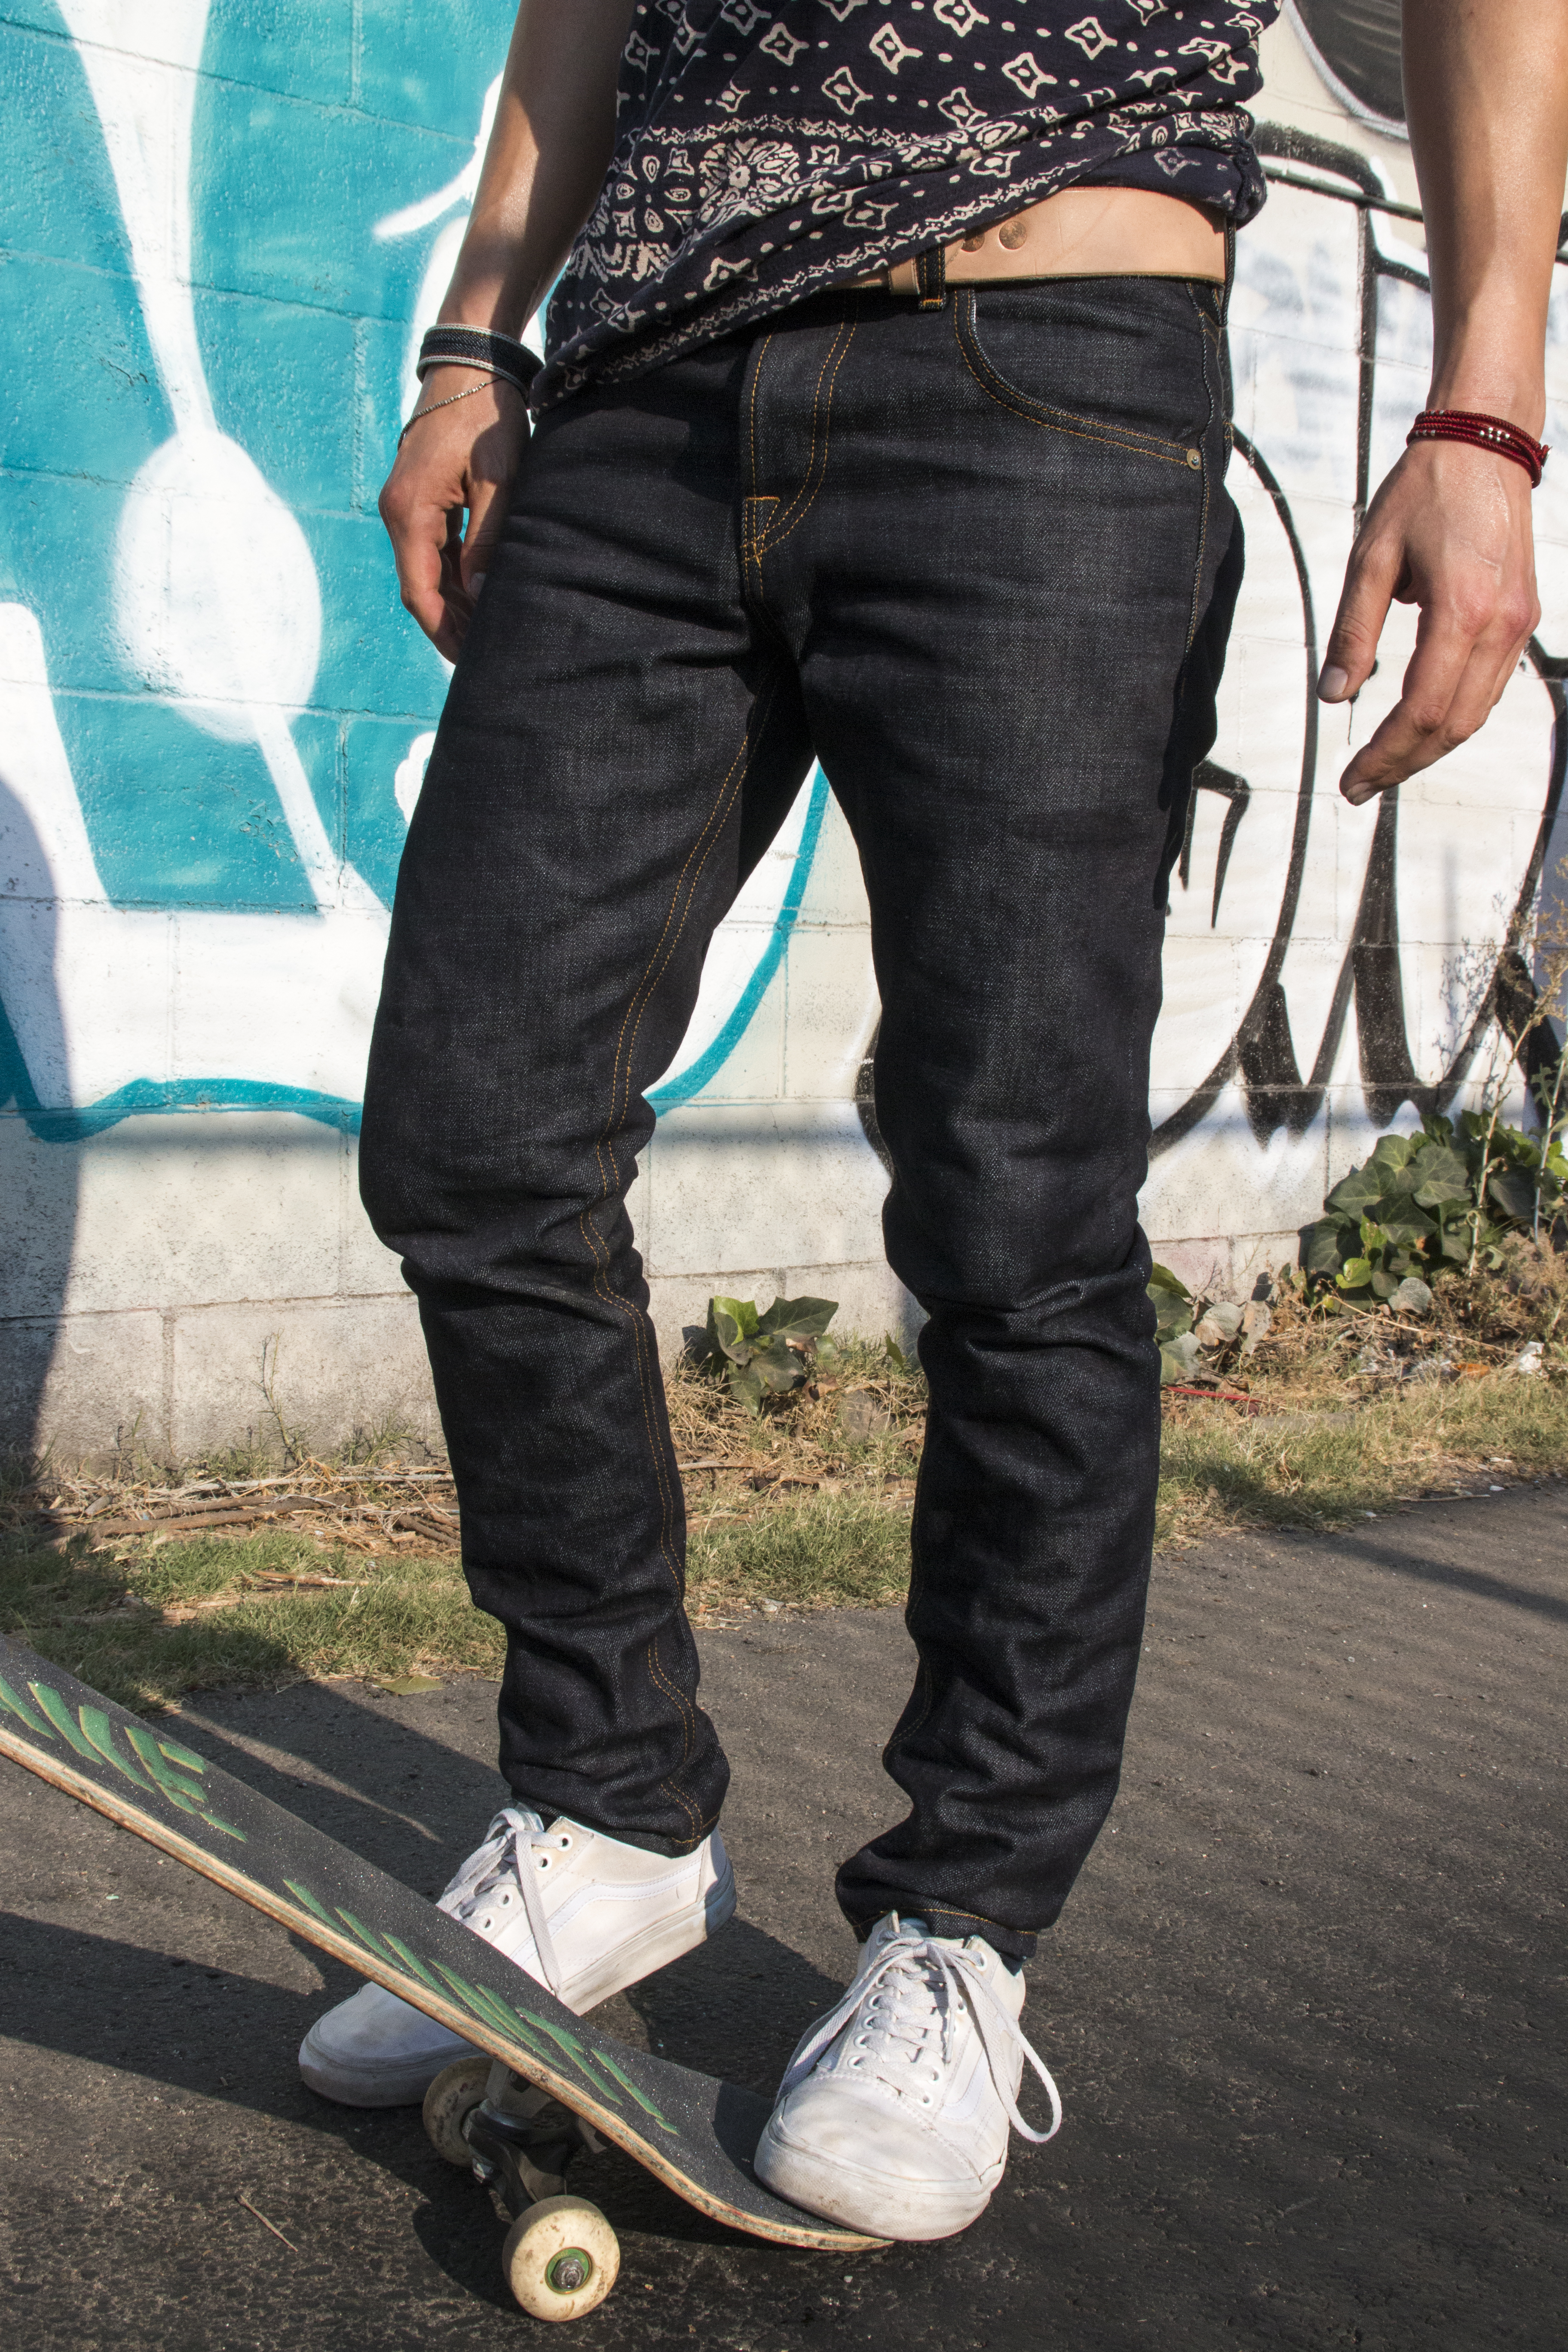 Brave Star Selvage Slim Taper 2.0 (2 Years, 2 Soaks) - Fade of the Day